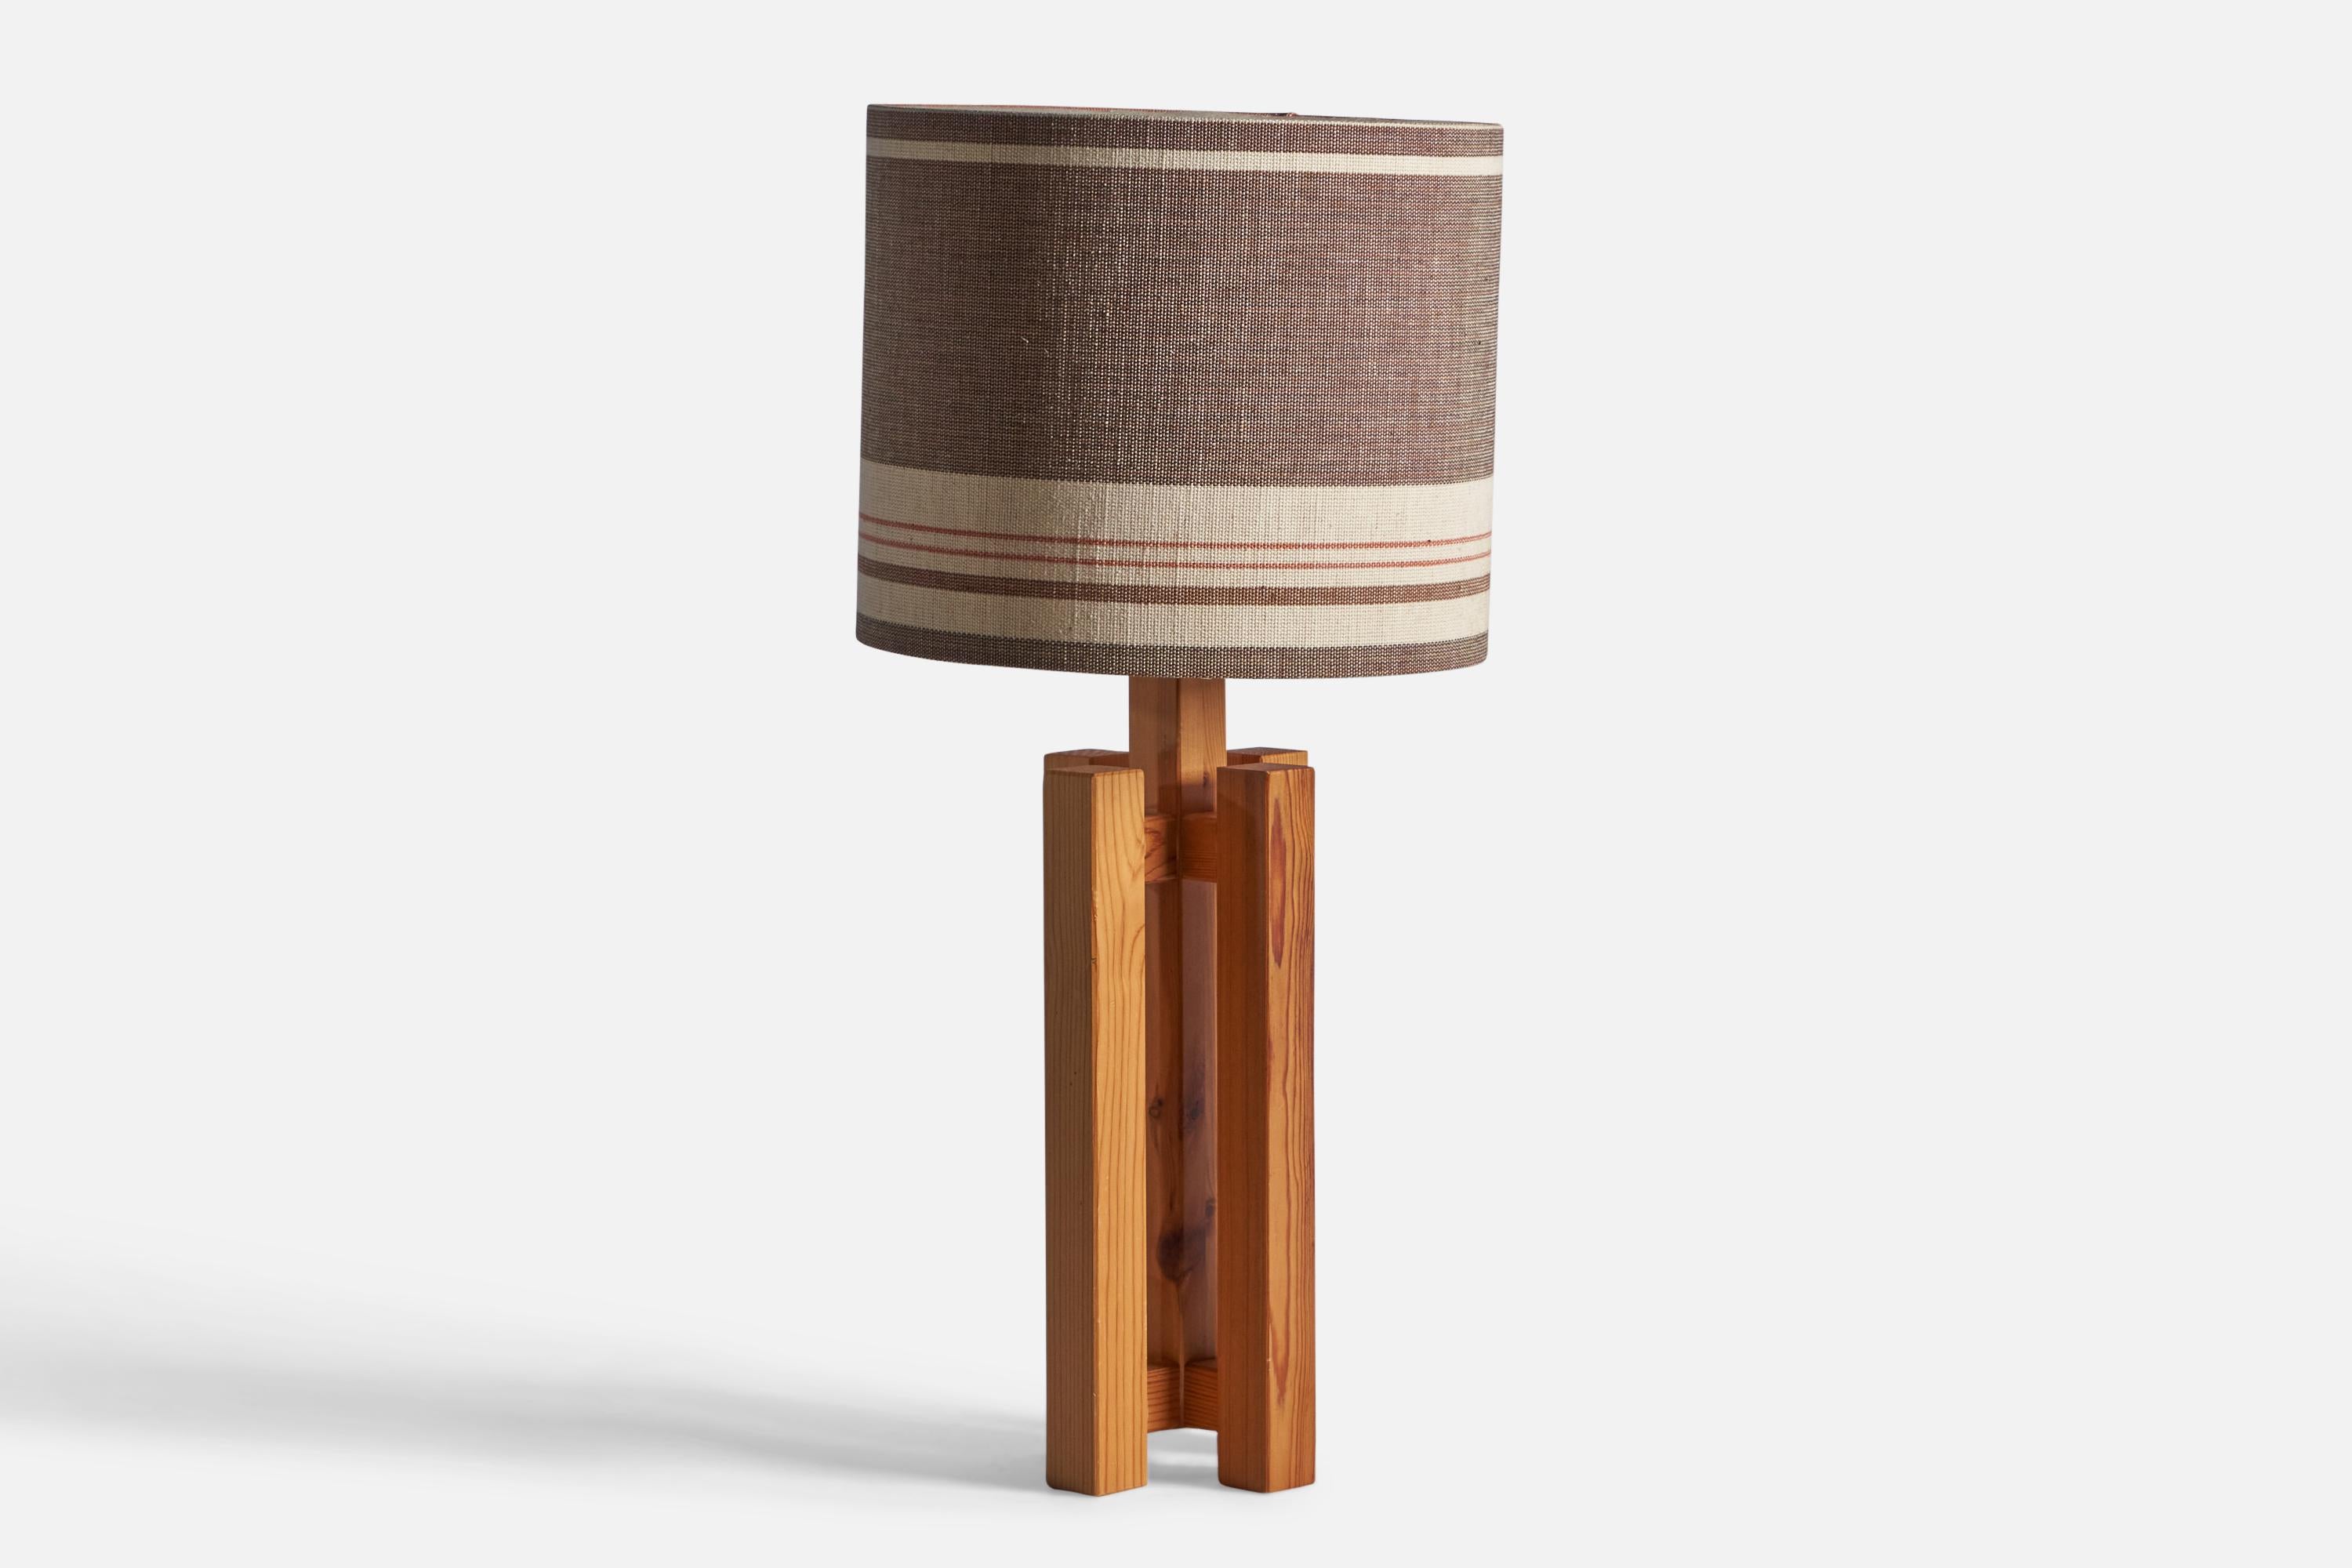 A solid pine and fabric table lamp, designed and produced in Sweden, c. 1970s.

Overall Dimensions: 22.25